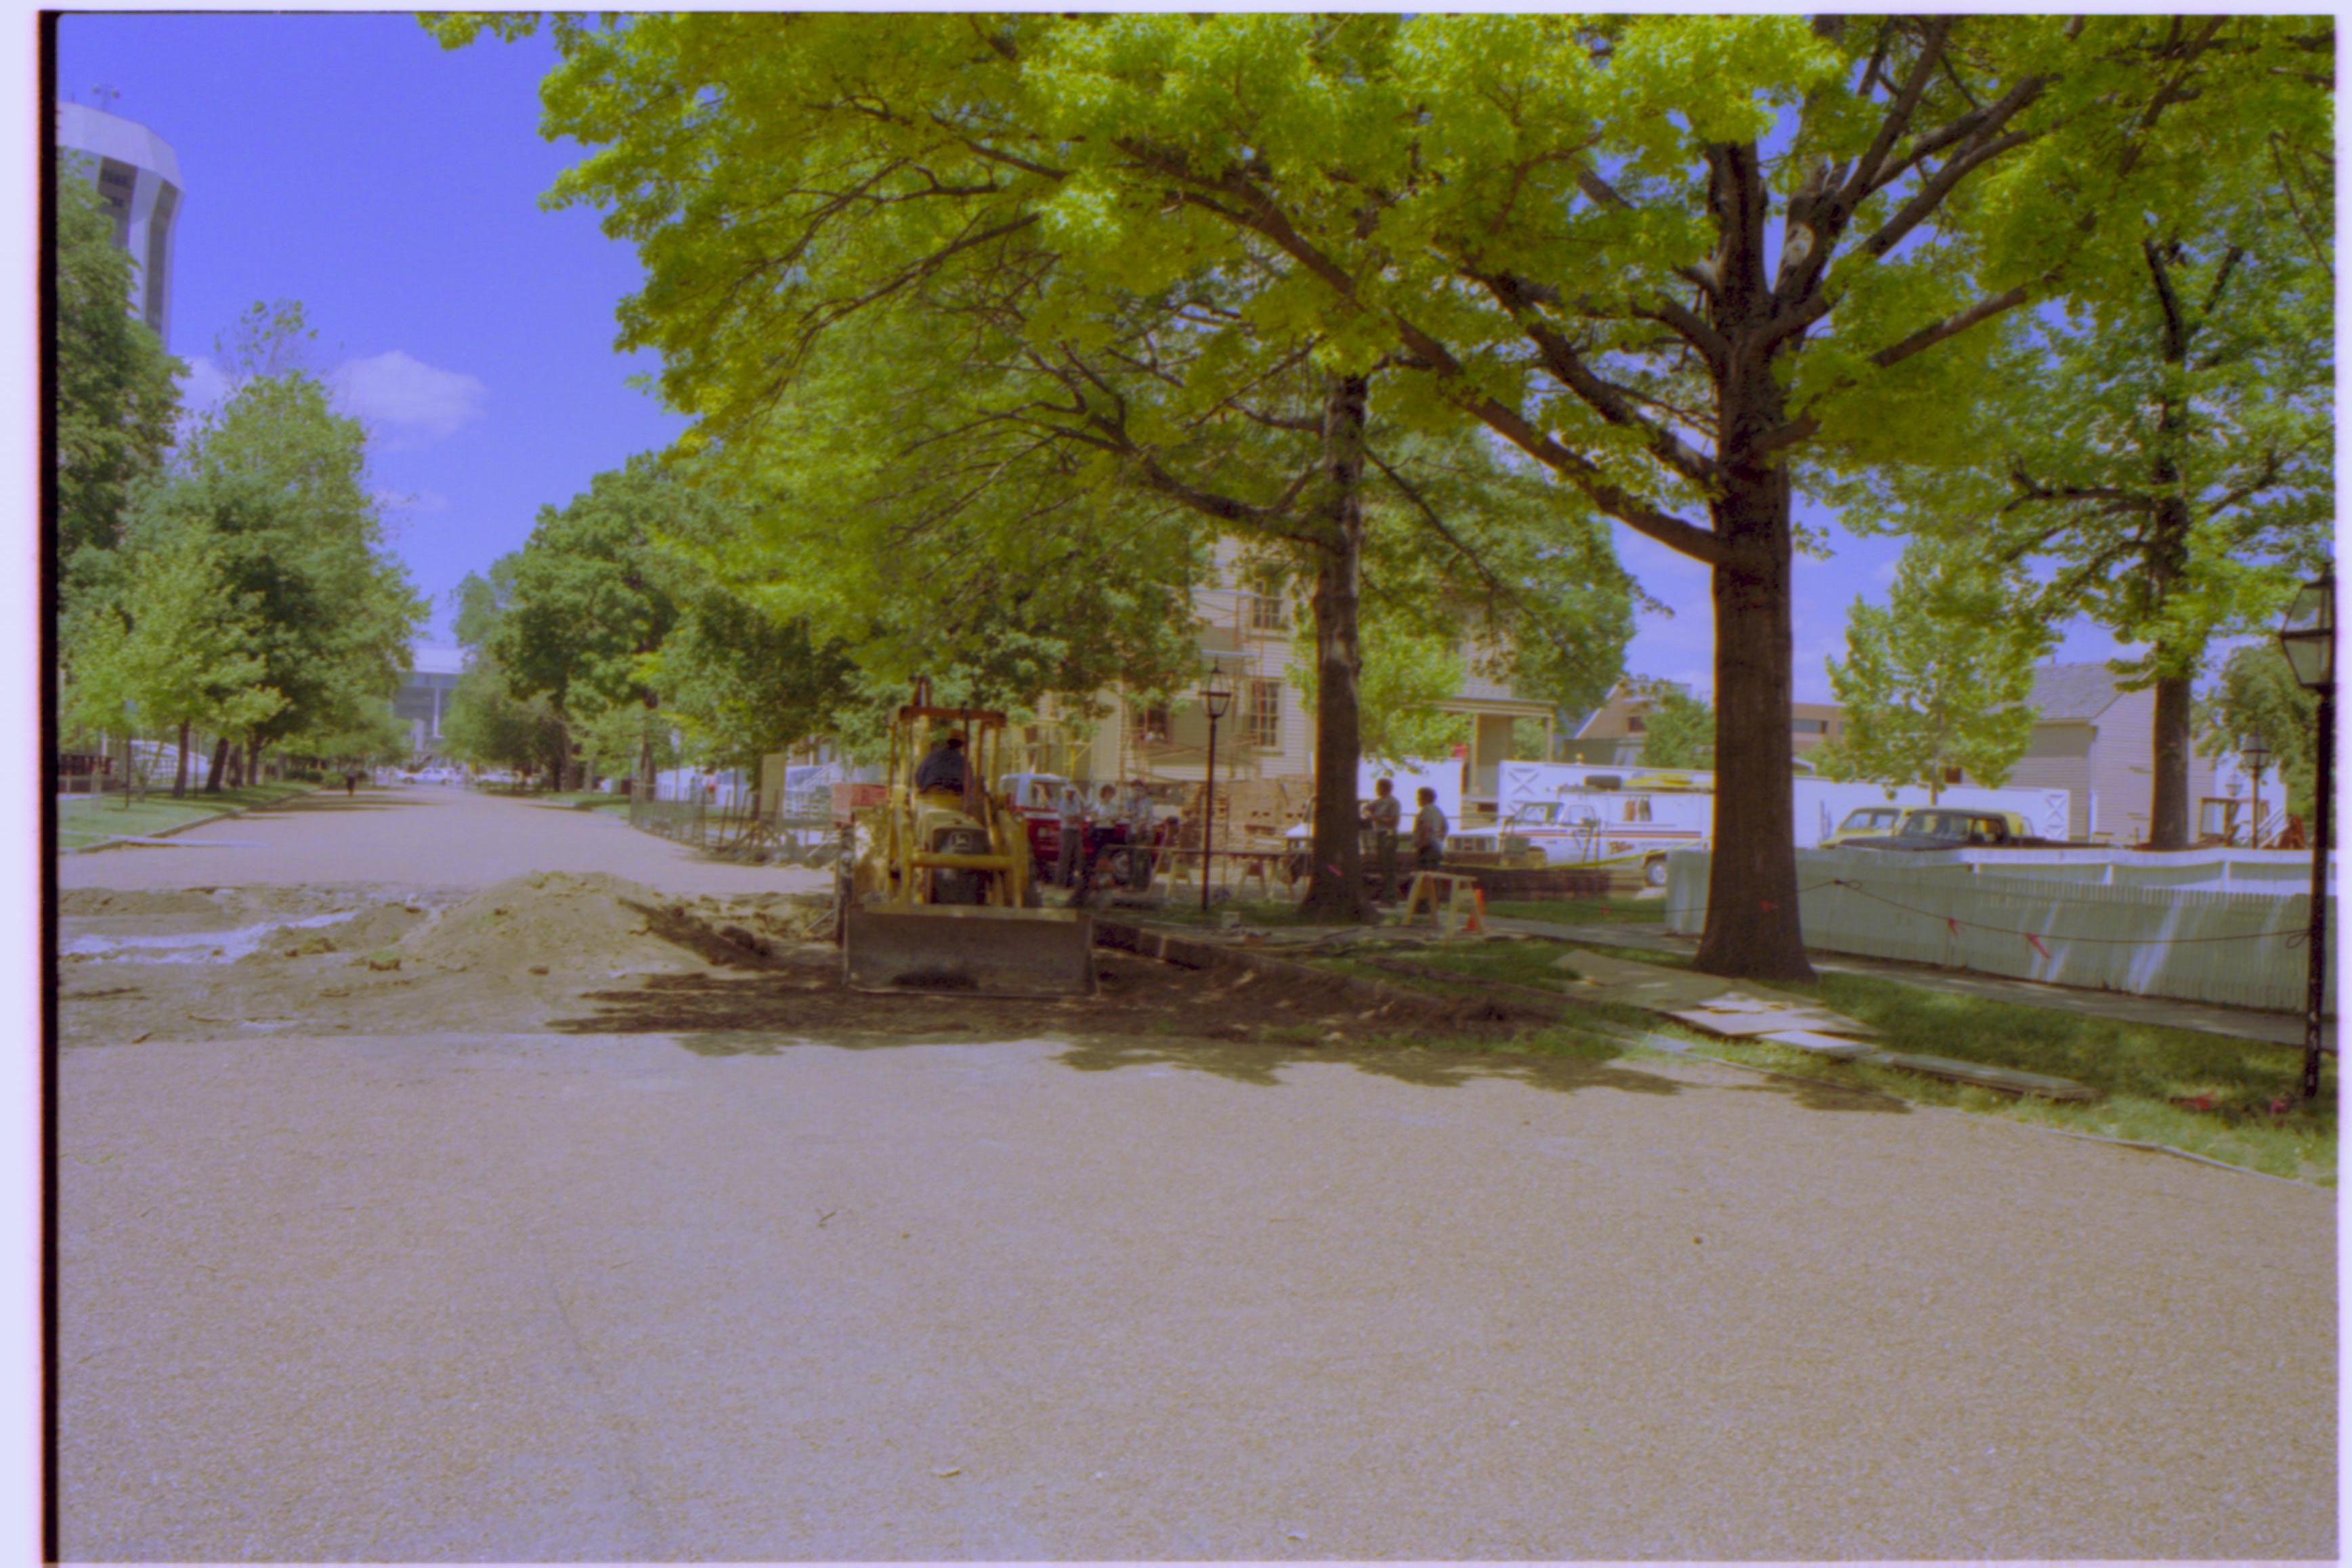 Construction, 8th and Jackson Sts., Sidewalk and Street Construction, Sidewalk, Street